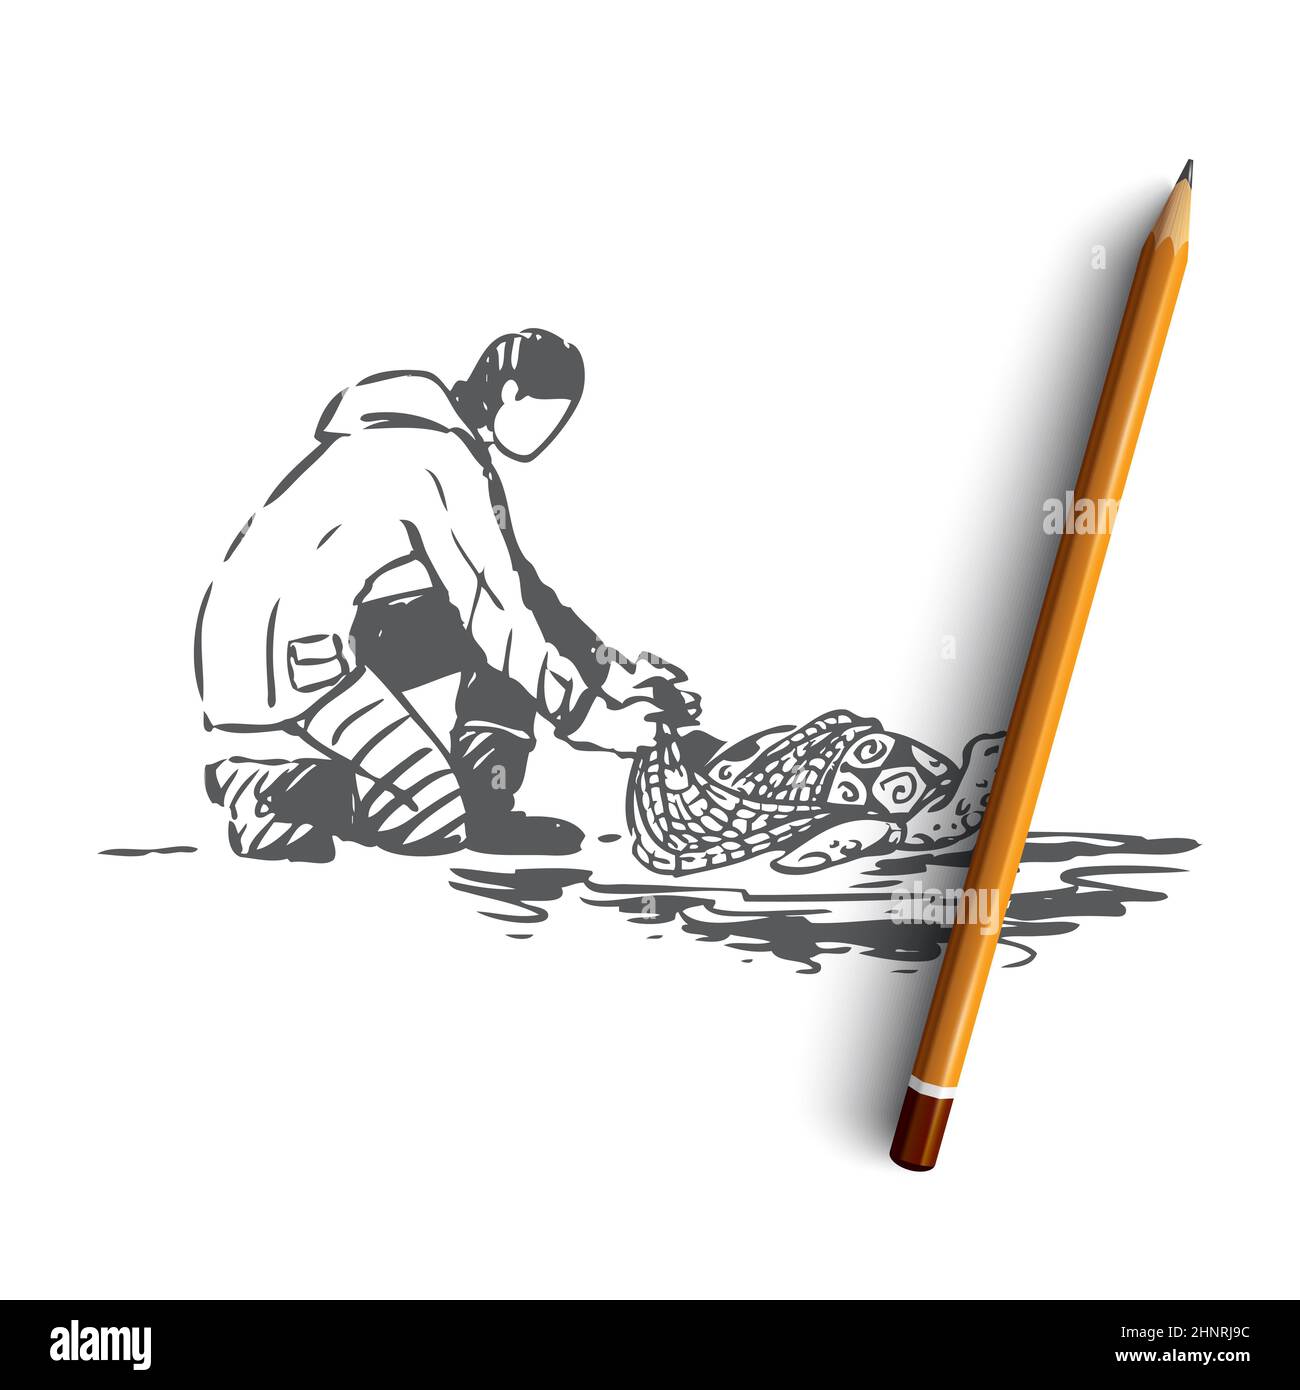 Animal, ocean, turtle, eco, help concept. Hand drawn man save turtle from net concept sketch. Isolated vector illustration. Stock Photo